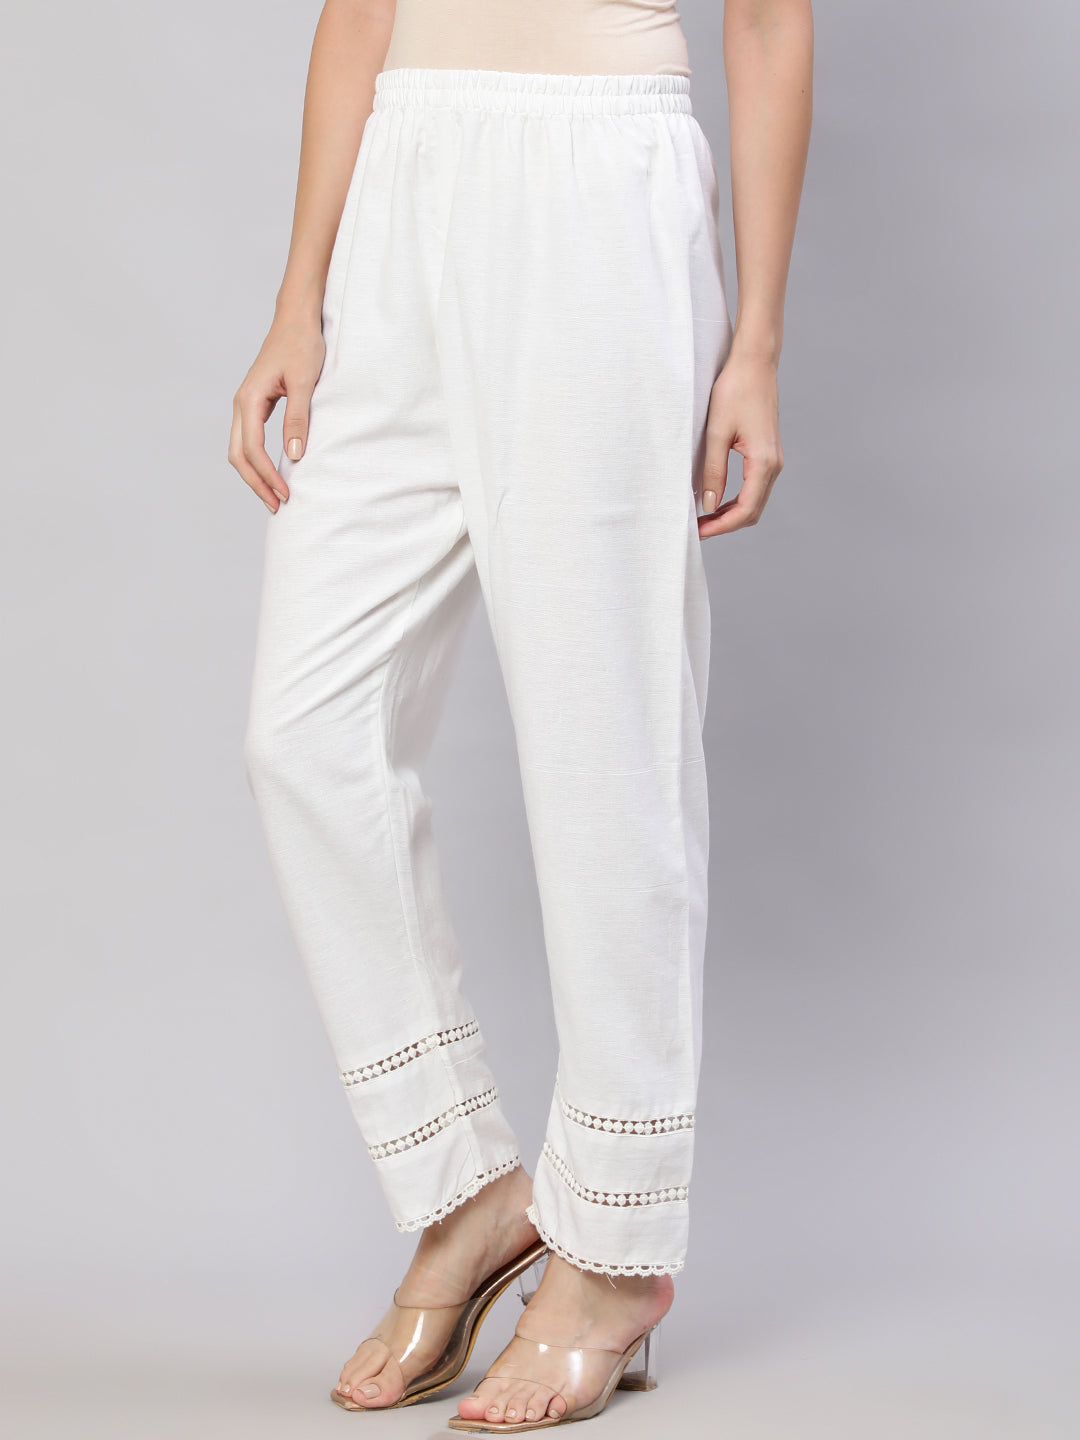 Women's White Solid Pant With Lace Details - Nayo Clothing